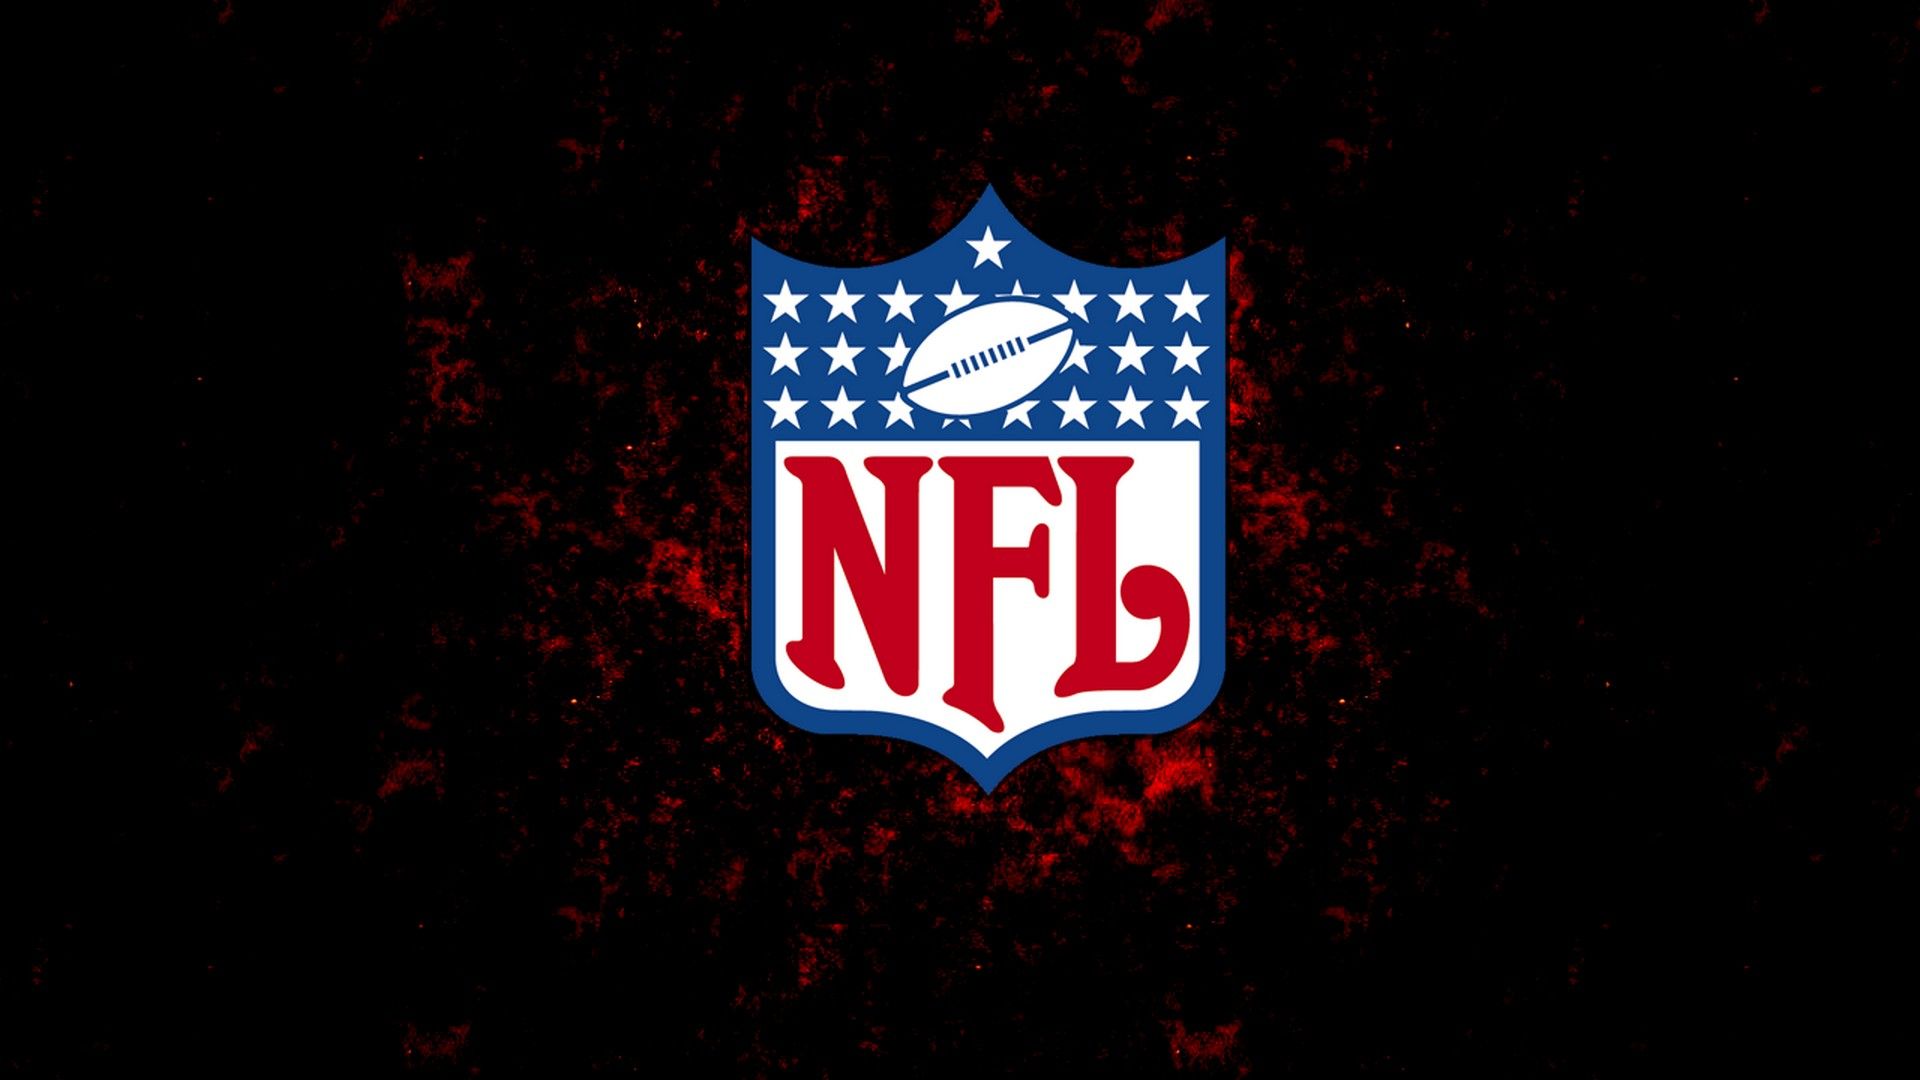 Cool Nfl Wallpaper For Mac Background Football